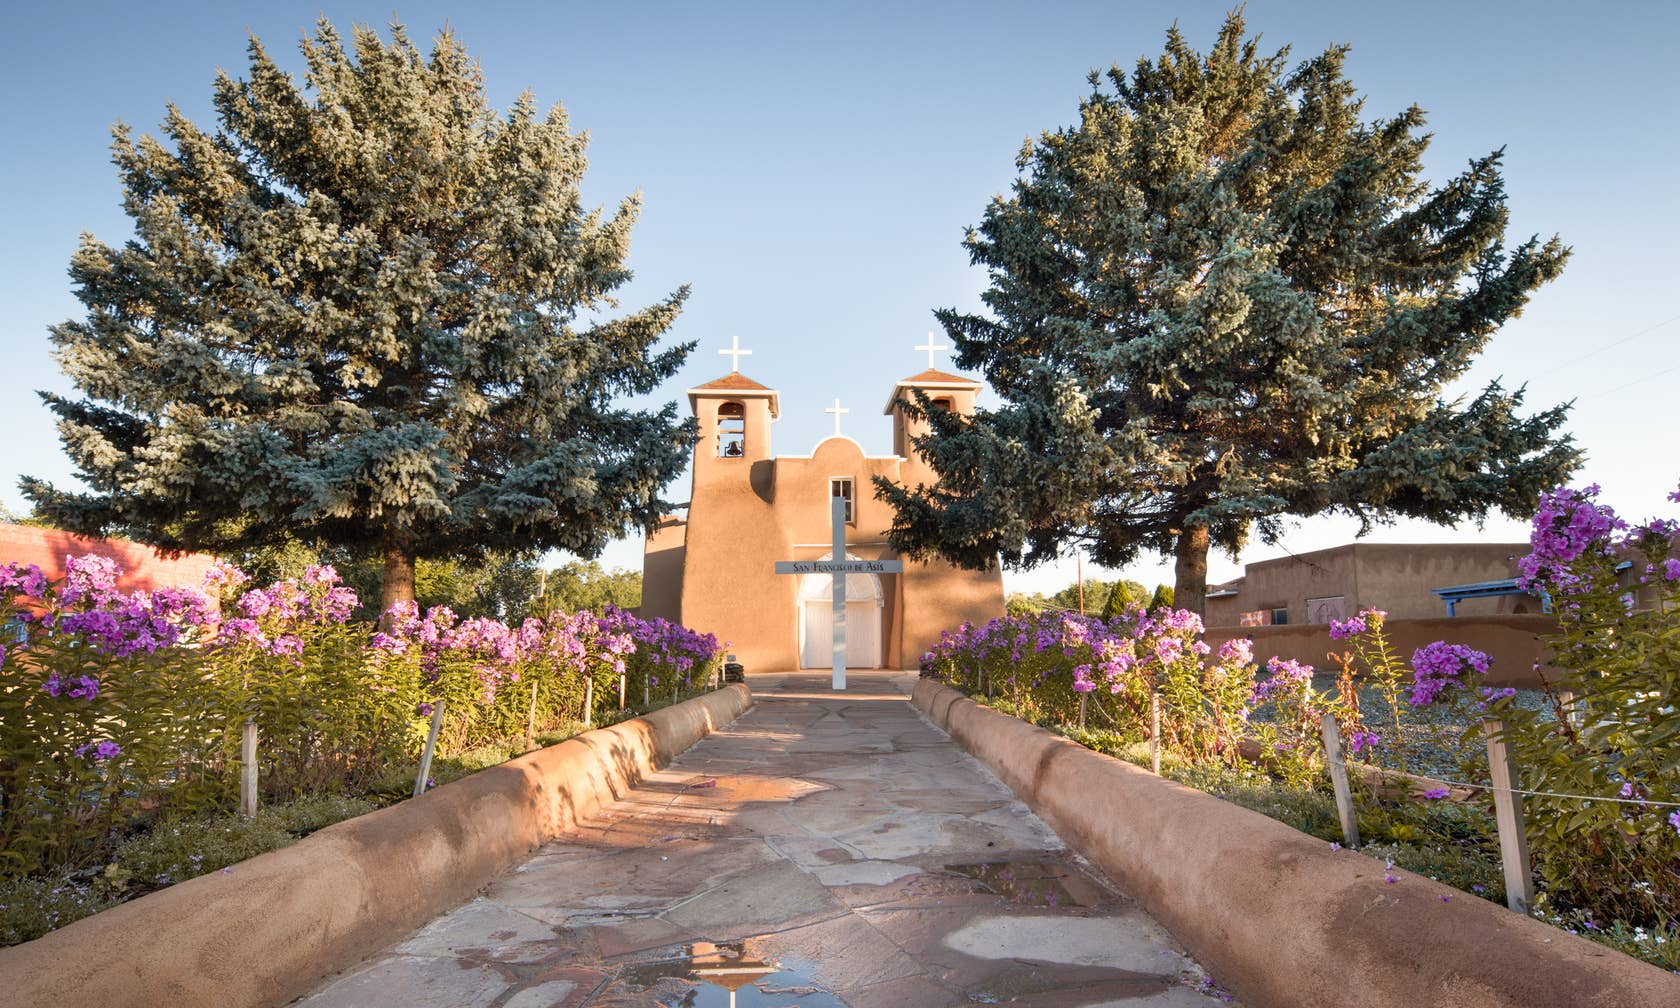 Holiday rentals in Taos